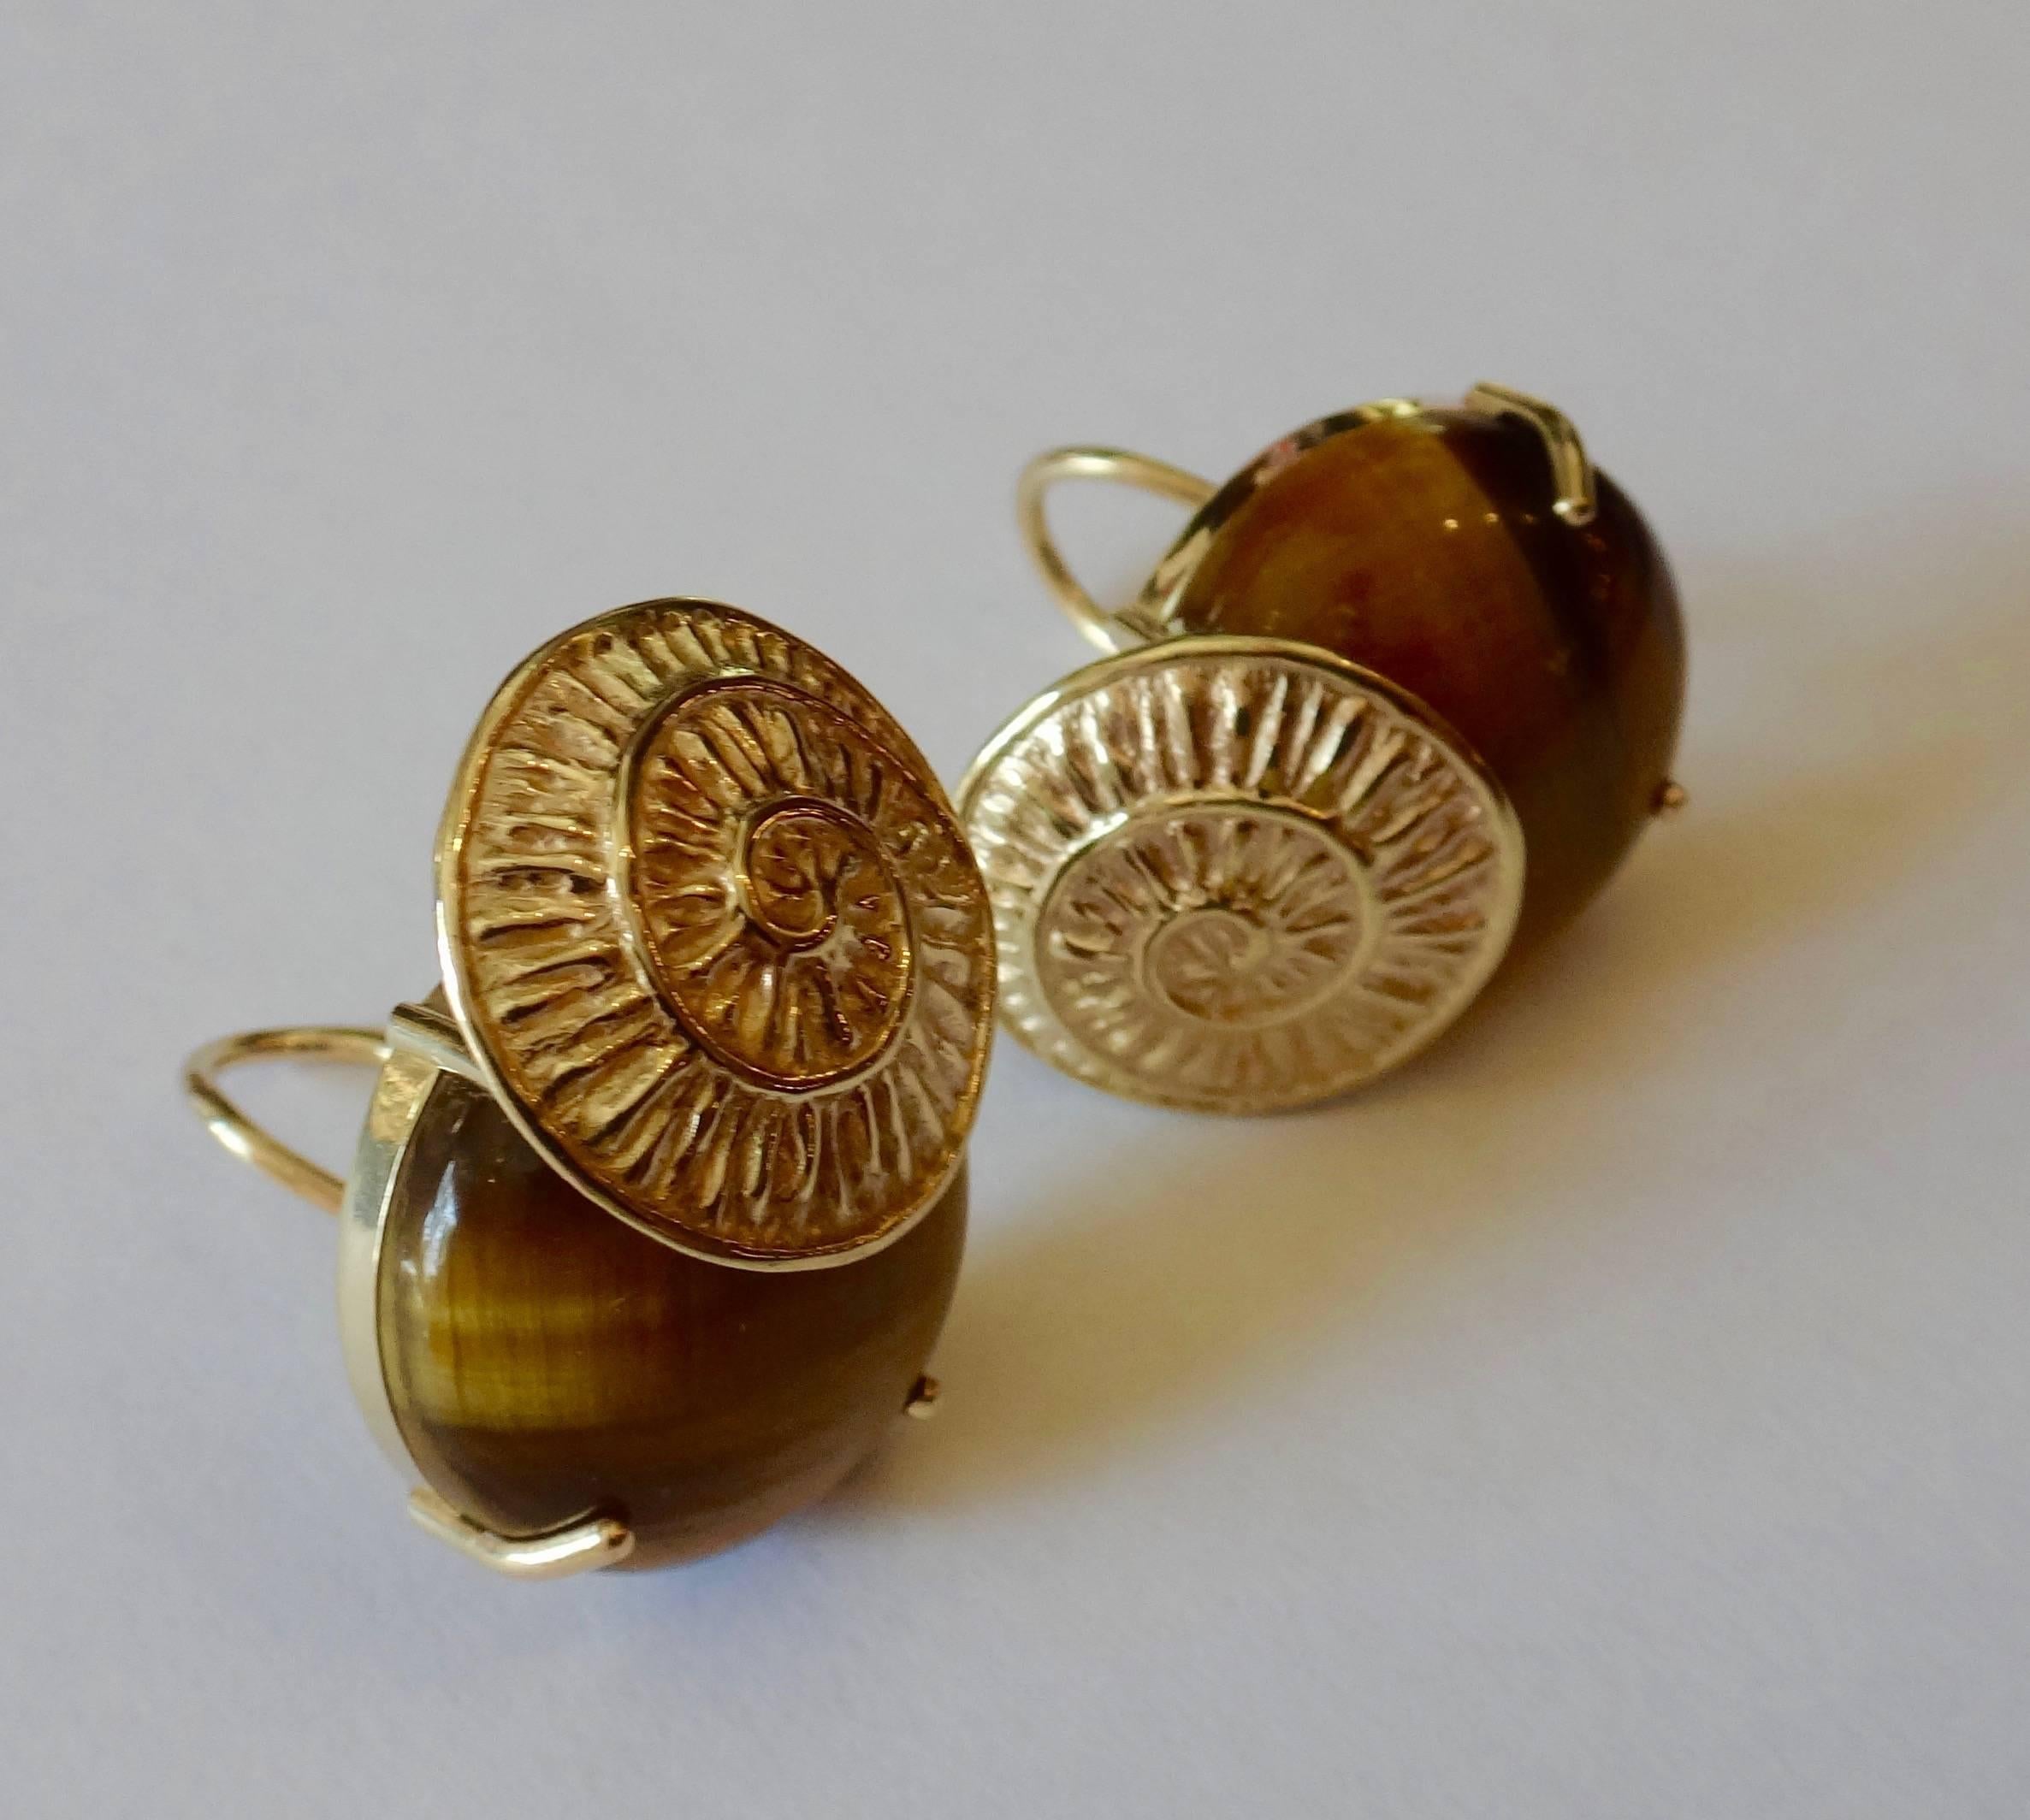 20mm round golden tiger's eyes with a wonderful silky luster are set in 14k yellow gold spiral button earrings.  The handmade earrings come with posts with omega clip backs for comfort and safety.  